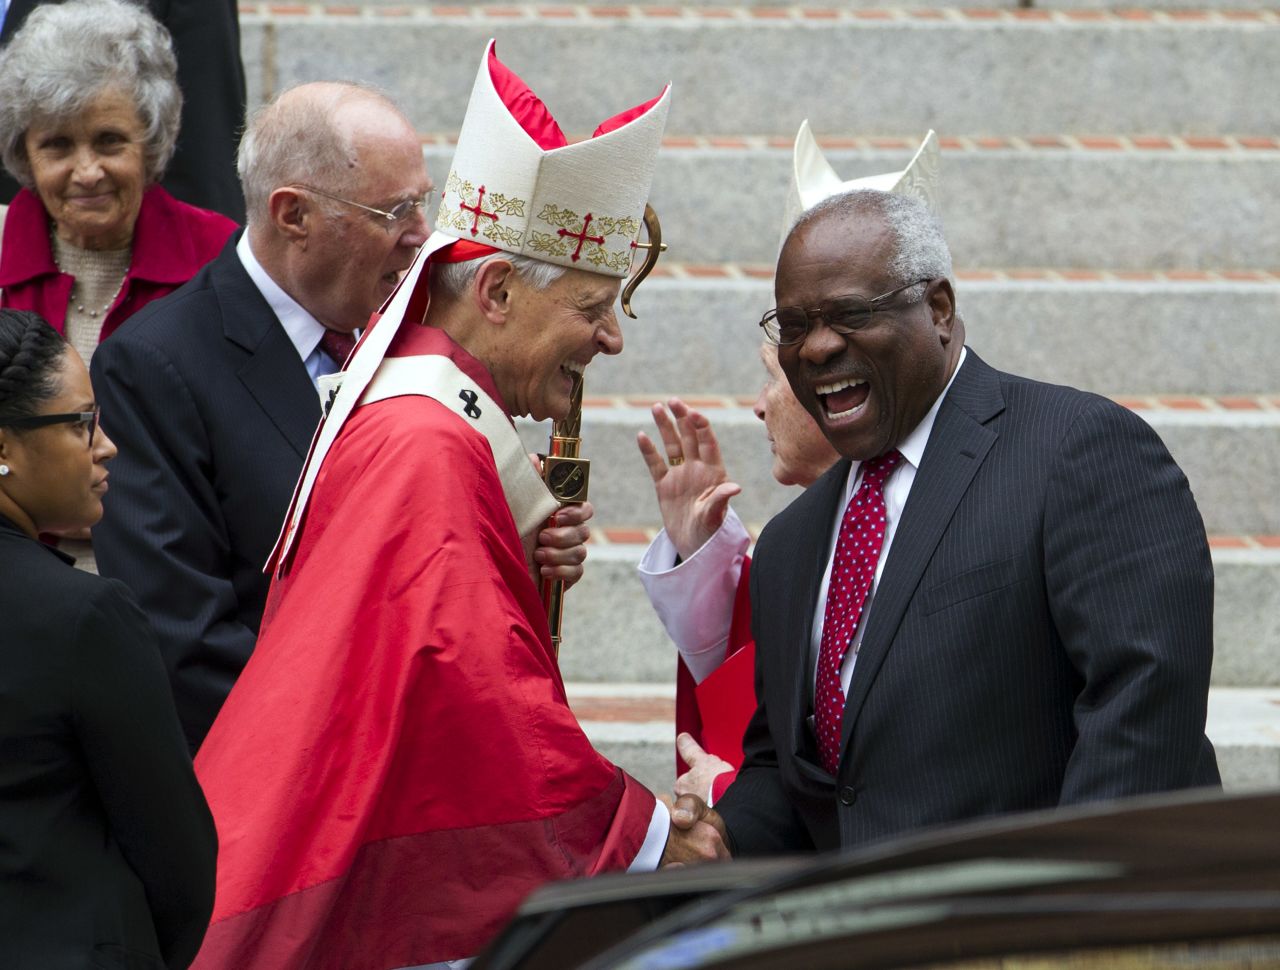 Cardinal Donald Wuerl, the archbishop of Washington, DC, shakes hands with Thomas in 2015.